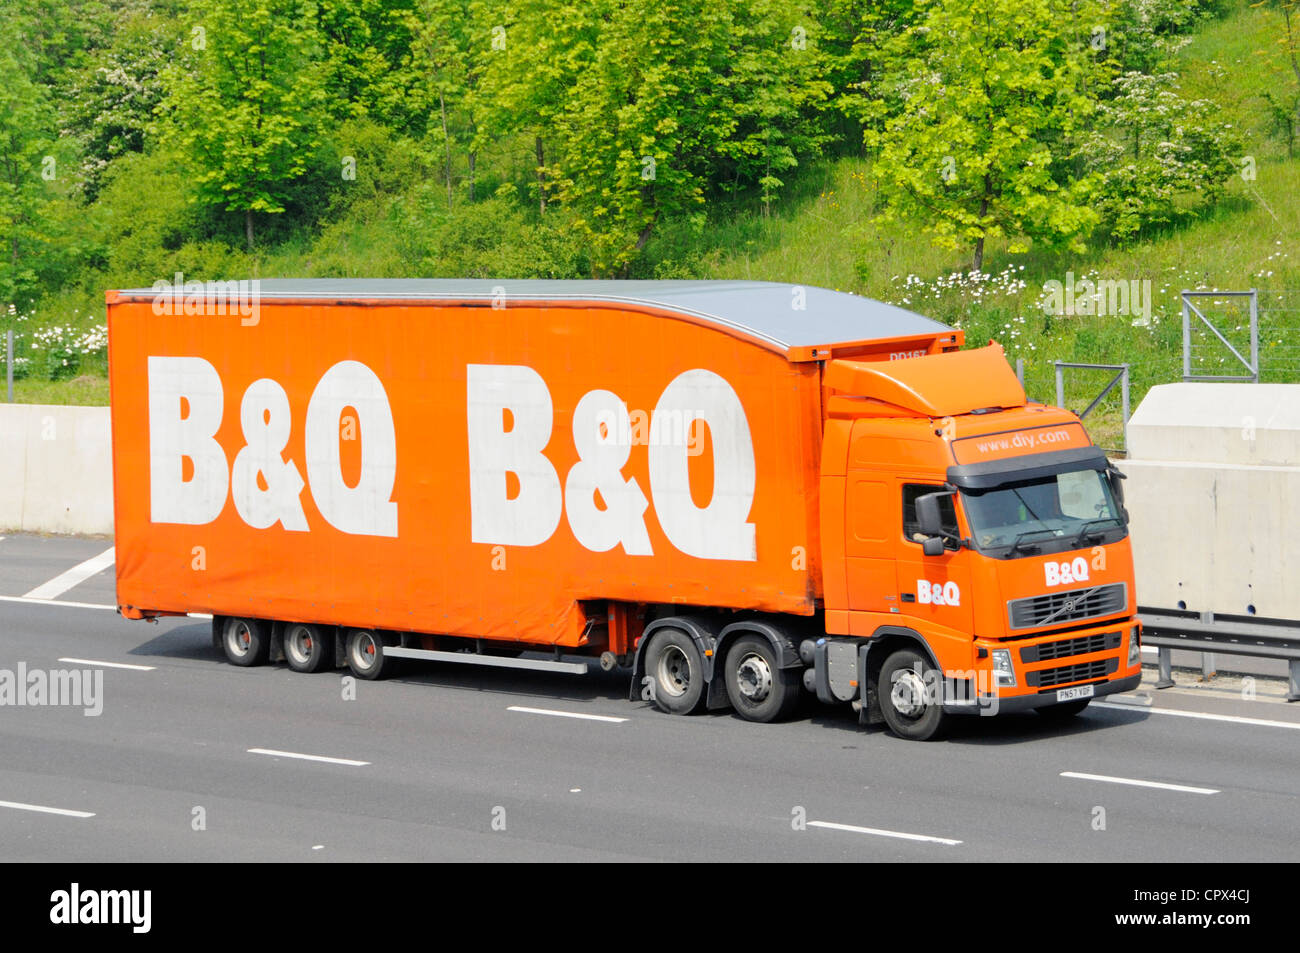 B&Q DIY retail & trade builders merchant business supply chain store delivery hgv lorry truck & side curtain trailer brand logo driving on UK motorway Stock Photo